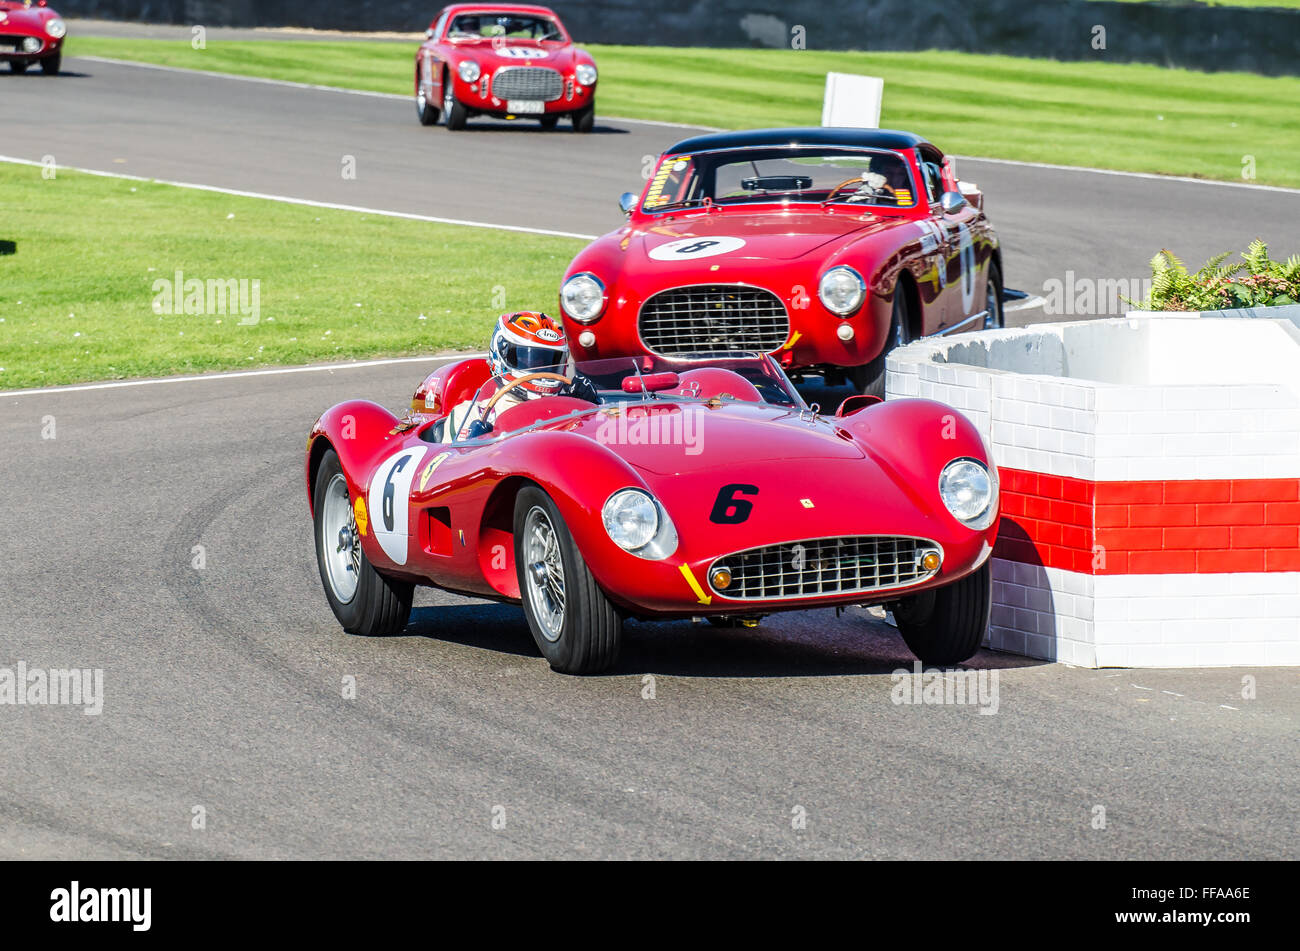 1957 Ferrari 500 TRC is owned by Ernst Schuster and was raced by Emanuele Piro at the 2015 Goodwood Revival Stock Photo